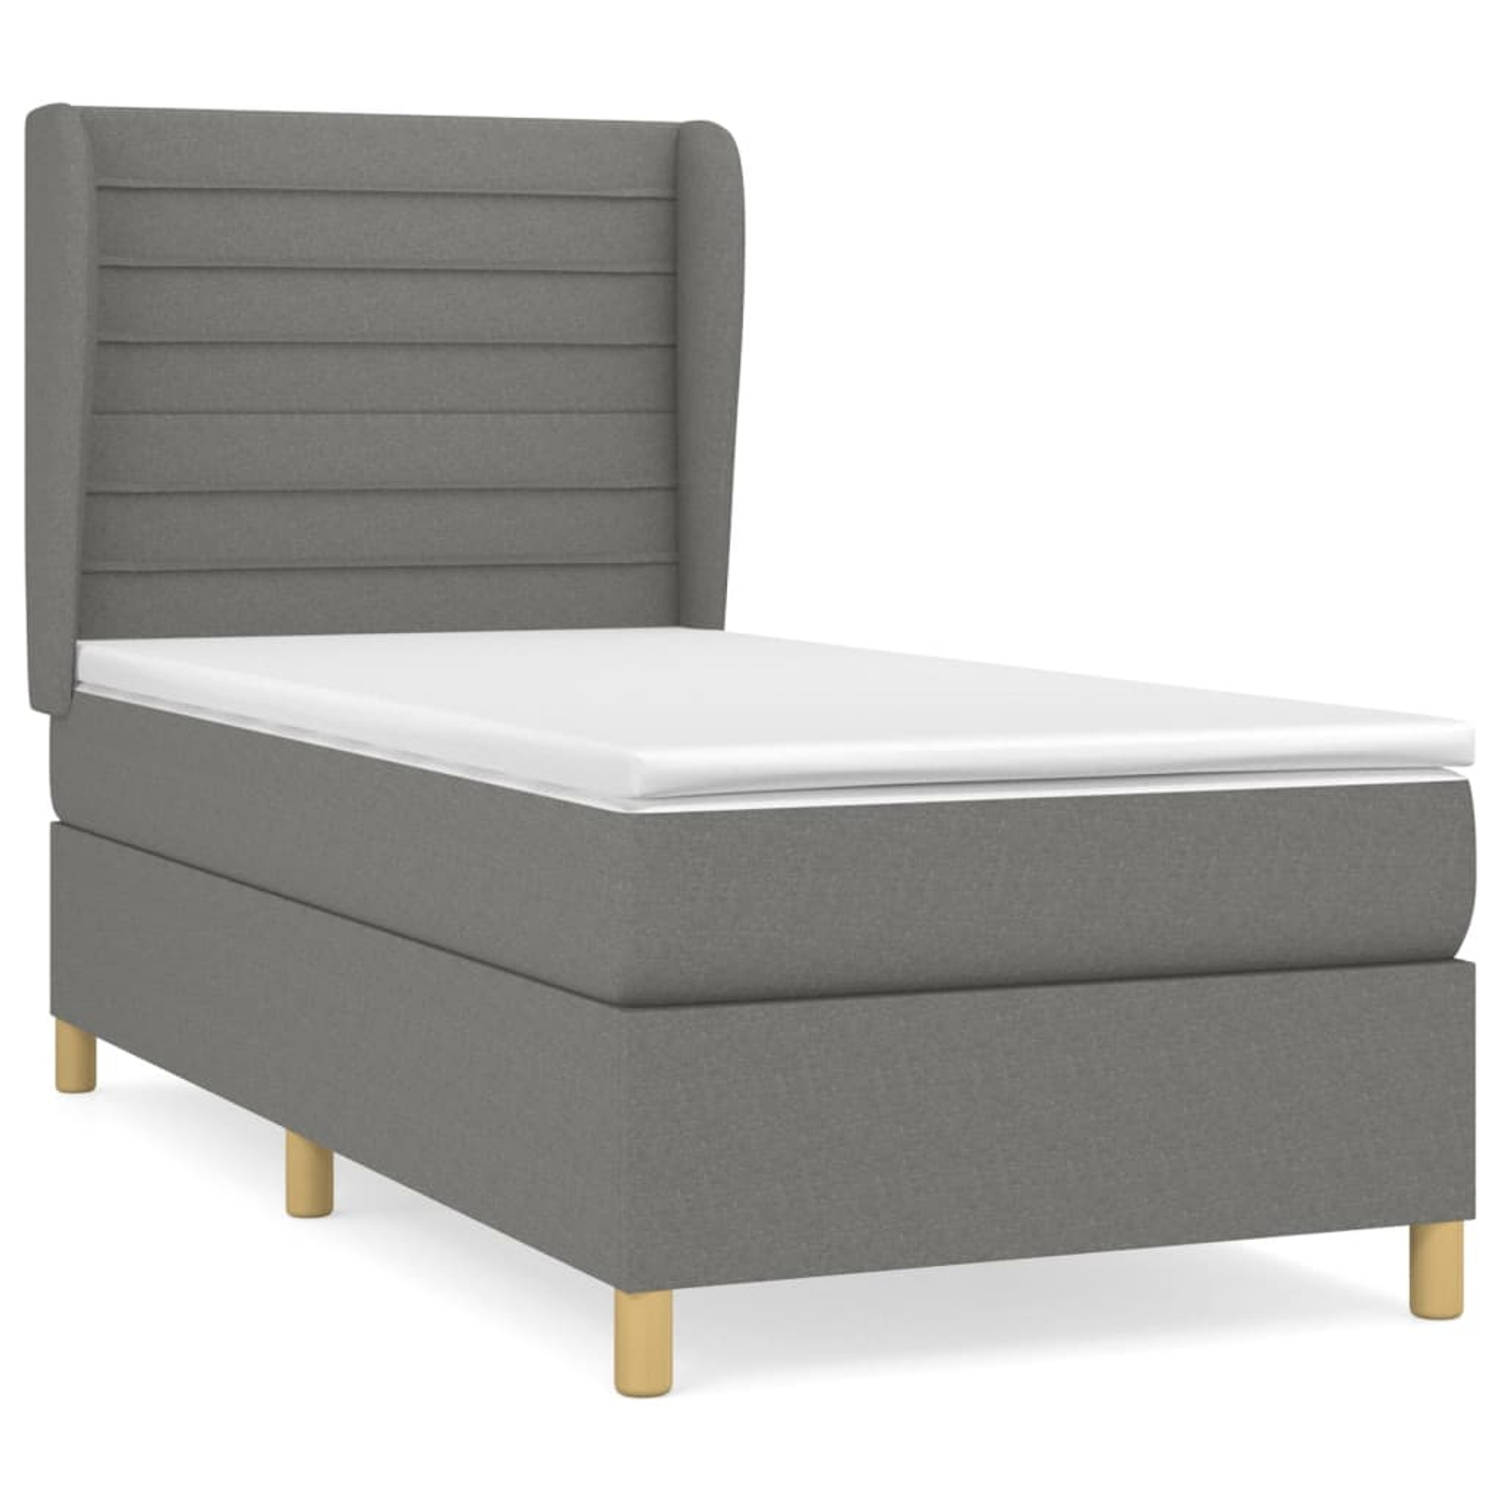 The Living Store Boxspringbed - Bed - 203x103x118/128cm - Donkergrijs